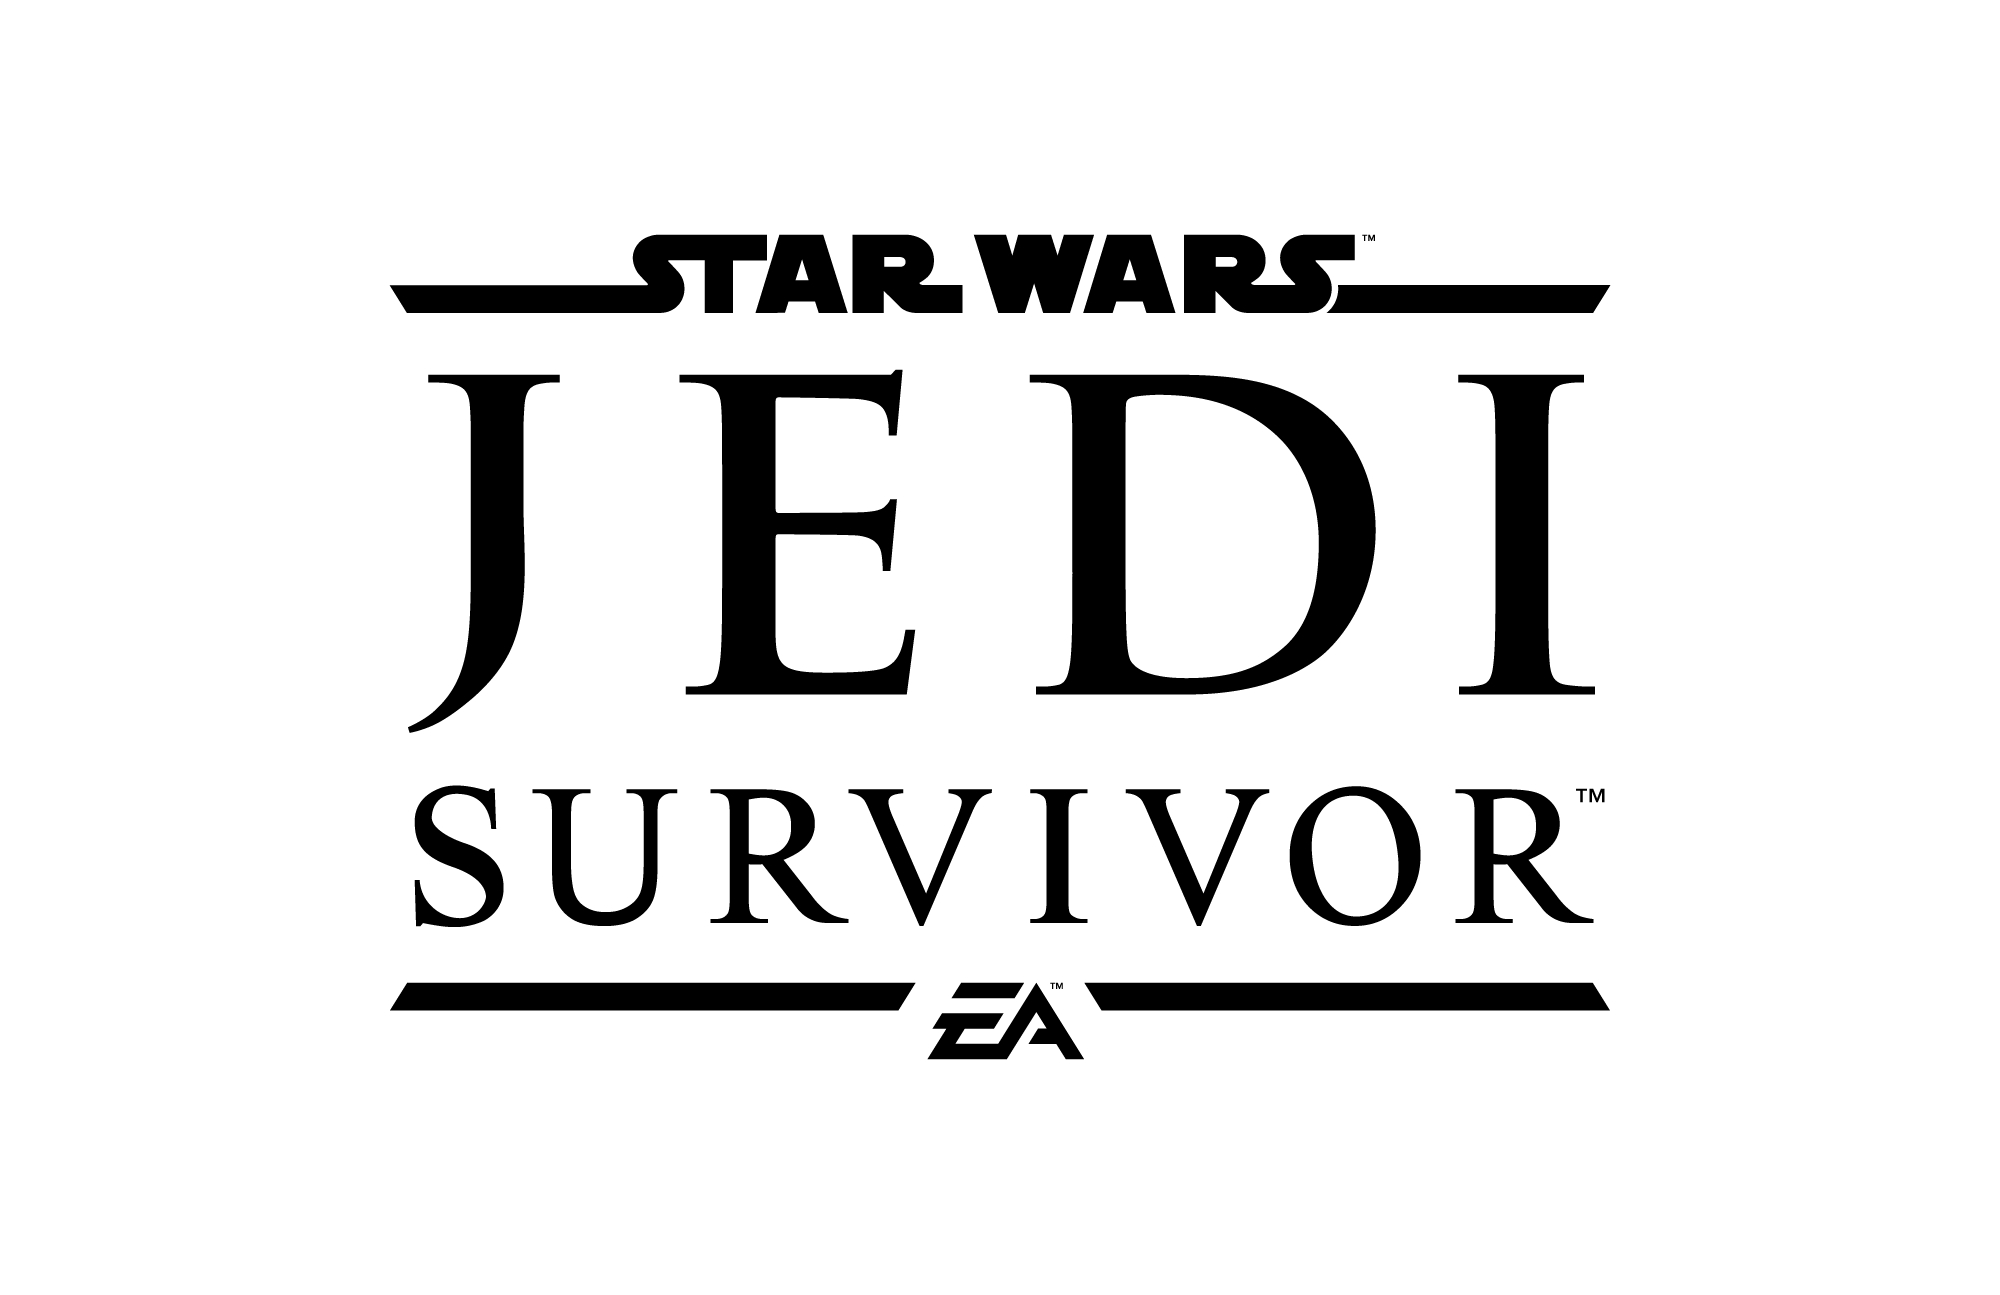 Wars Lucasfilm | and the Games Survivor, Action-Adventure Respawn Star in Business Epic Jedi: Unveil Next Wire the Acclaimed Series Chapter